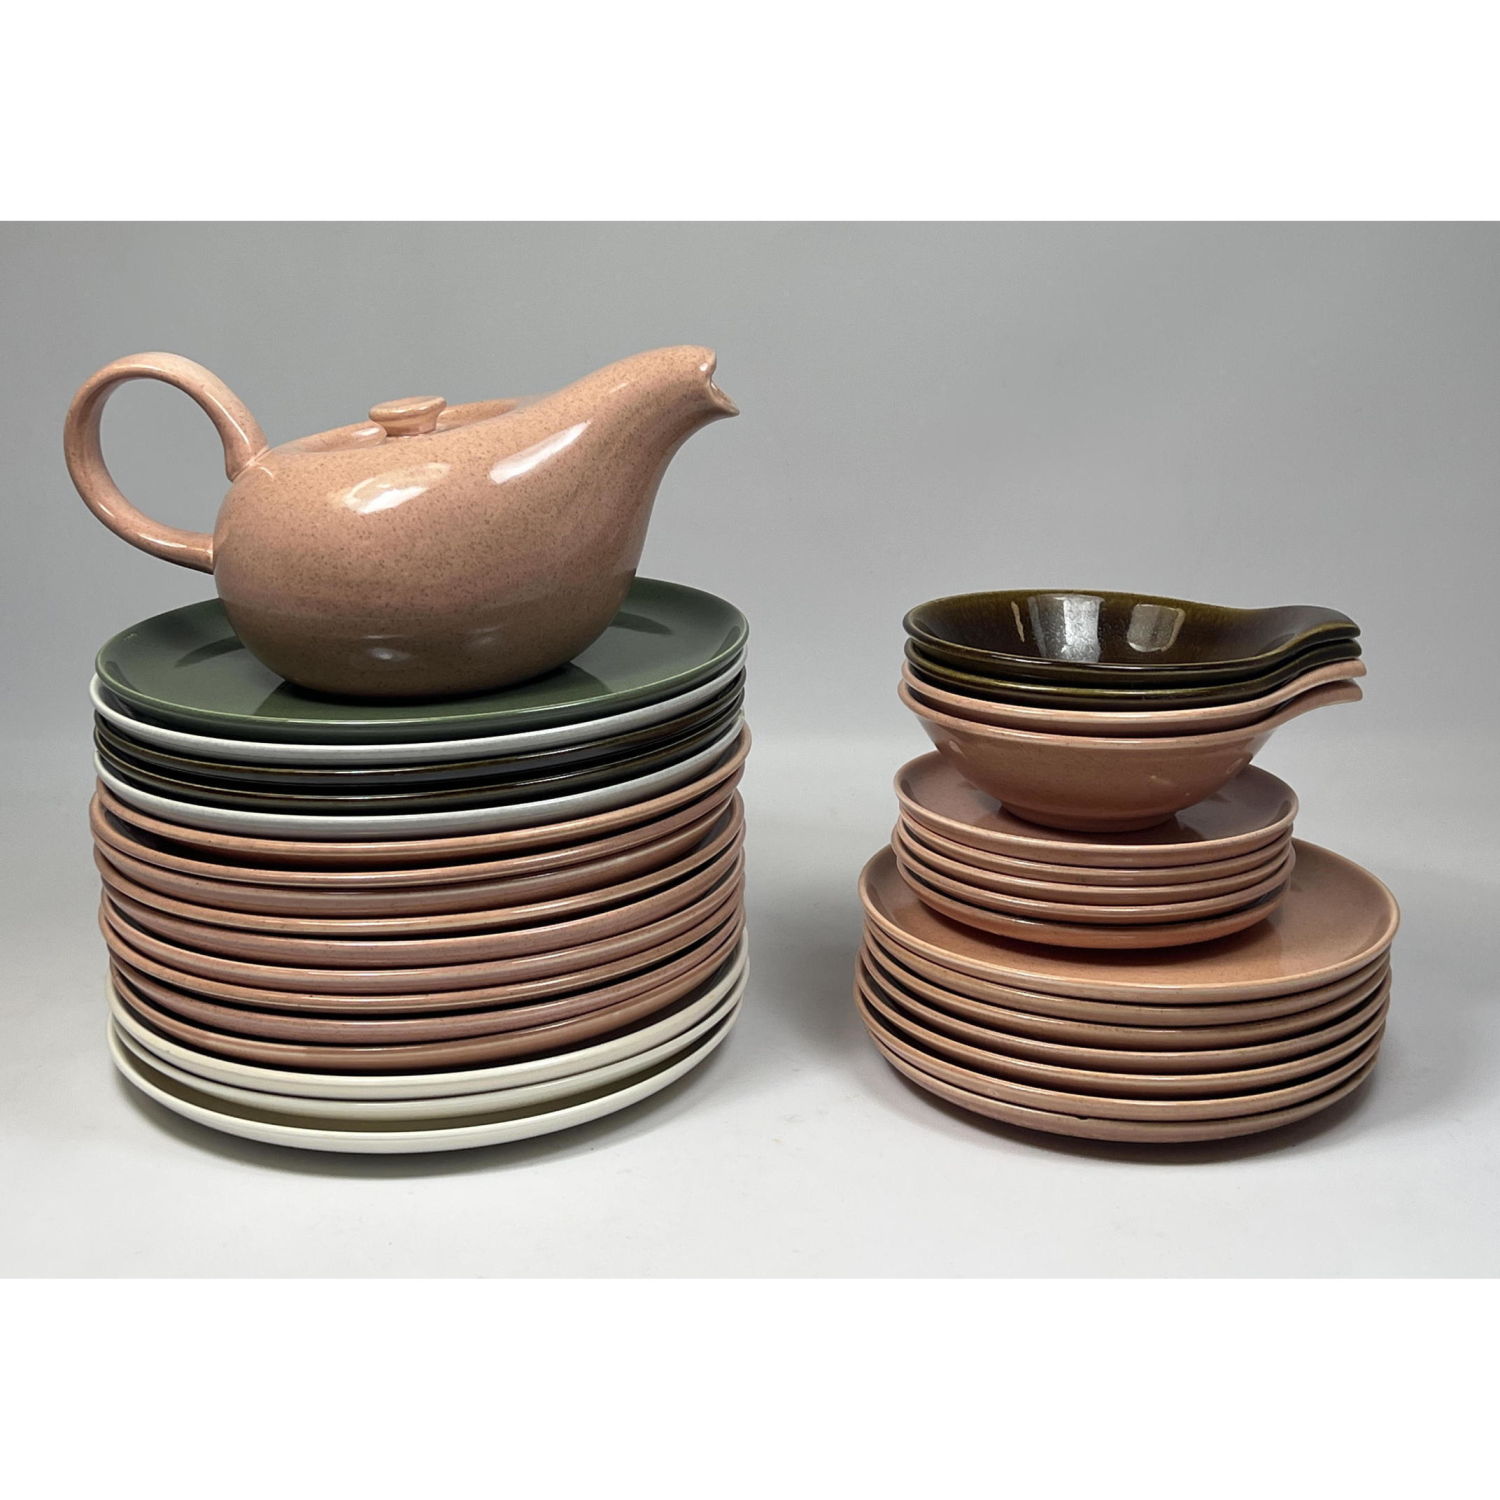 Russel Wright American Modern Dishes